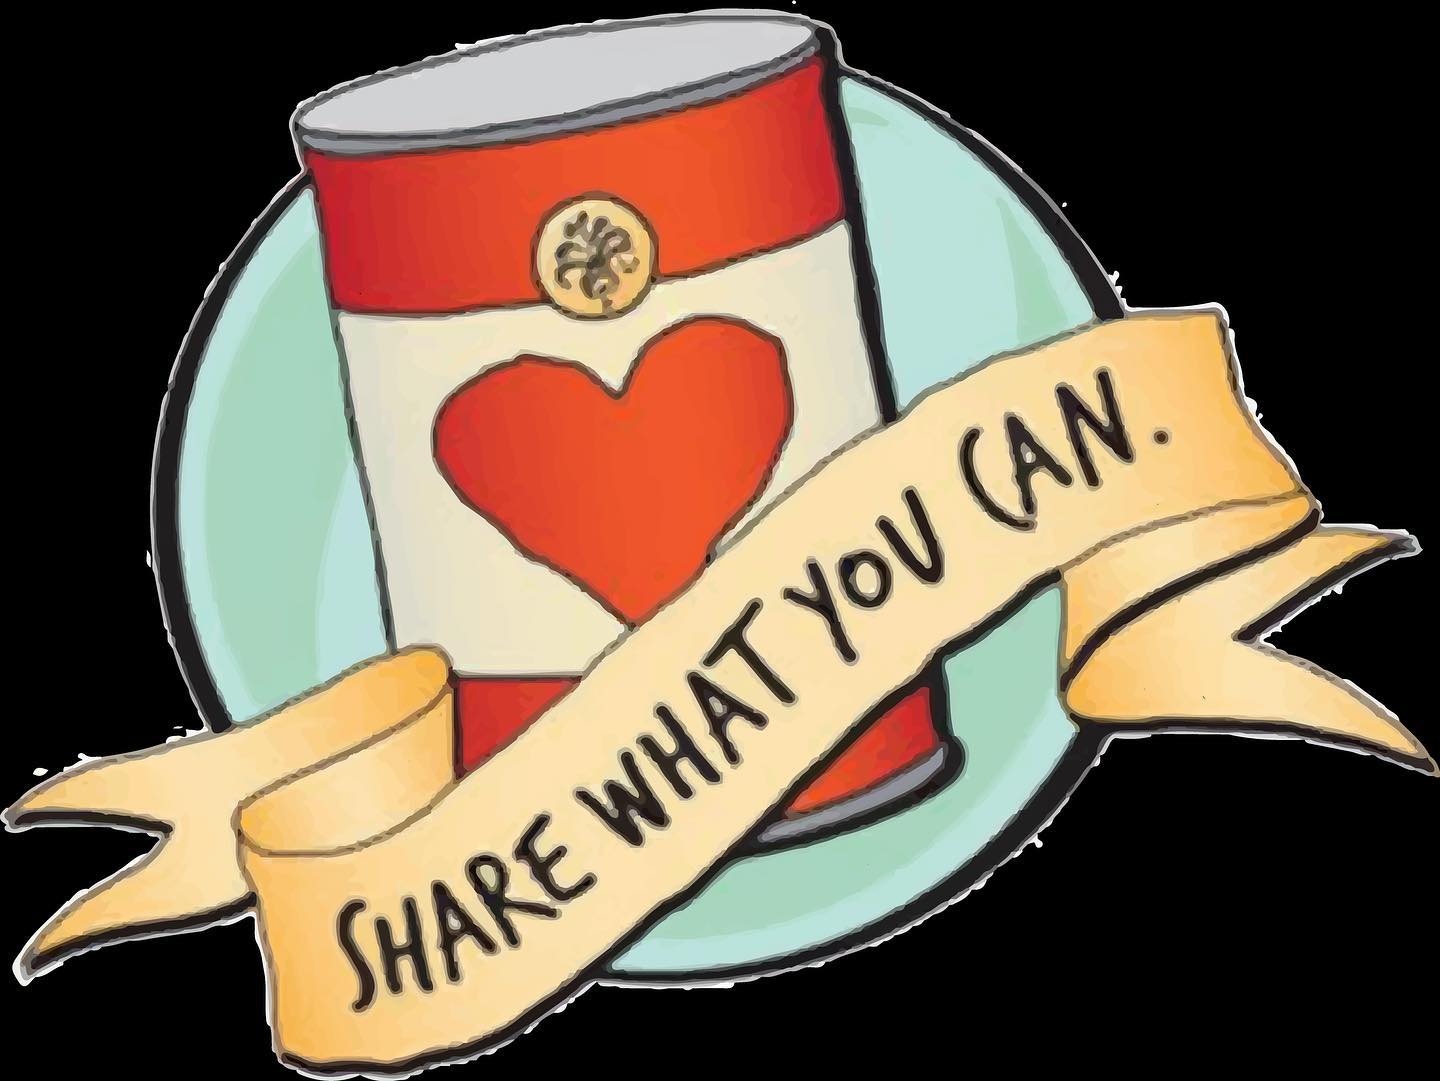 Just a reminder that every Wednesday before school we will be collecting goods for the local food bank. There will be an open truck on the Hiawatha side if you would like to drop anything off.

***A brief list of what food banks need most: infant foods and baby formula, personal hygiene products, SEASONINGS, canned or frozen meat and fish, dairy (fresh or powdered), diapers, canned vegetables and fruit, and meat alternatives, along with the usual pantry staples.***